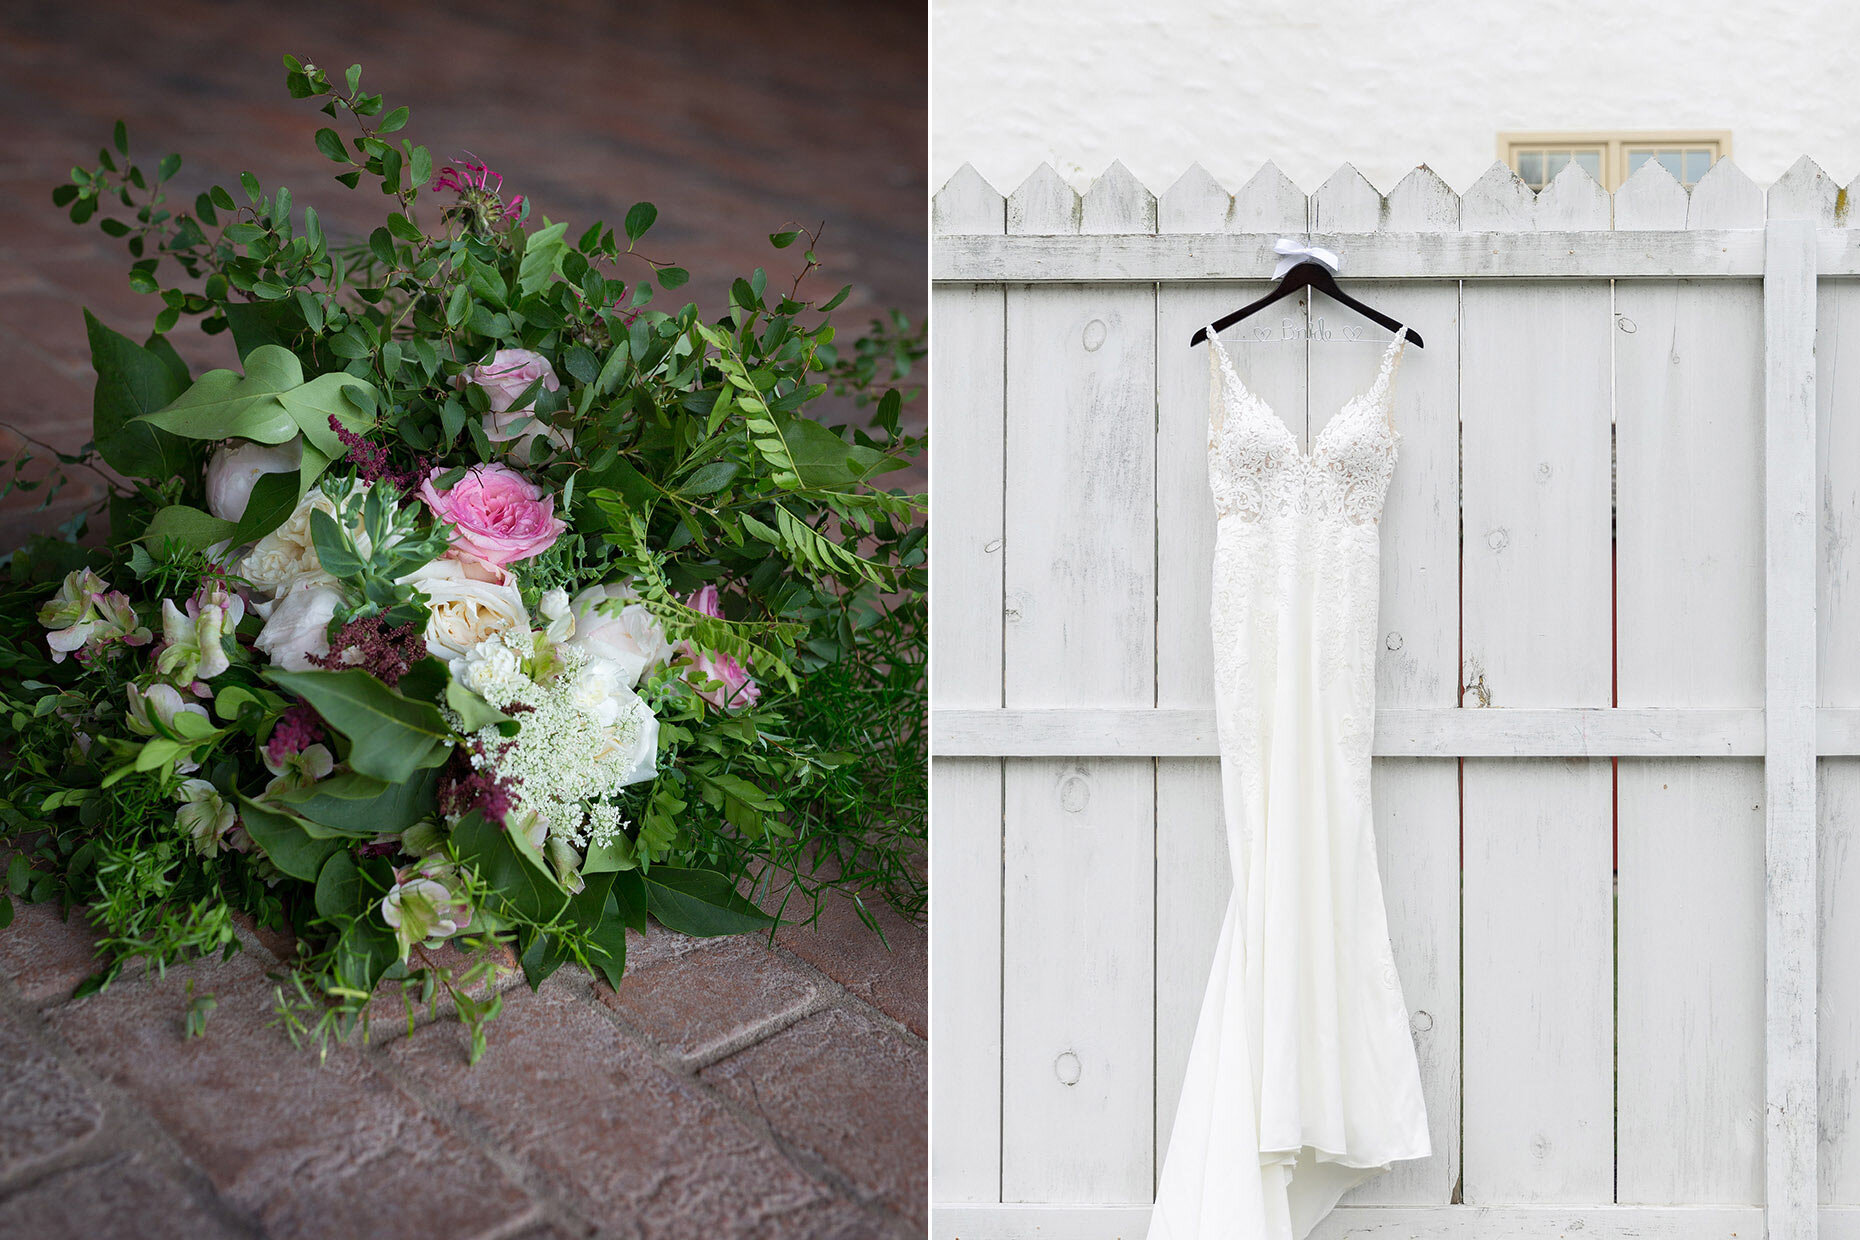 Bride's Dress on a fence with Bouquet on Bricks